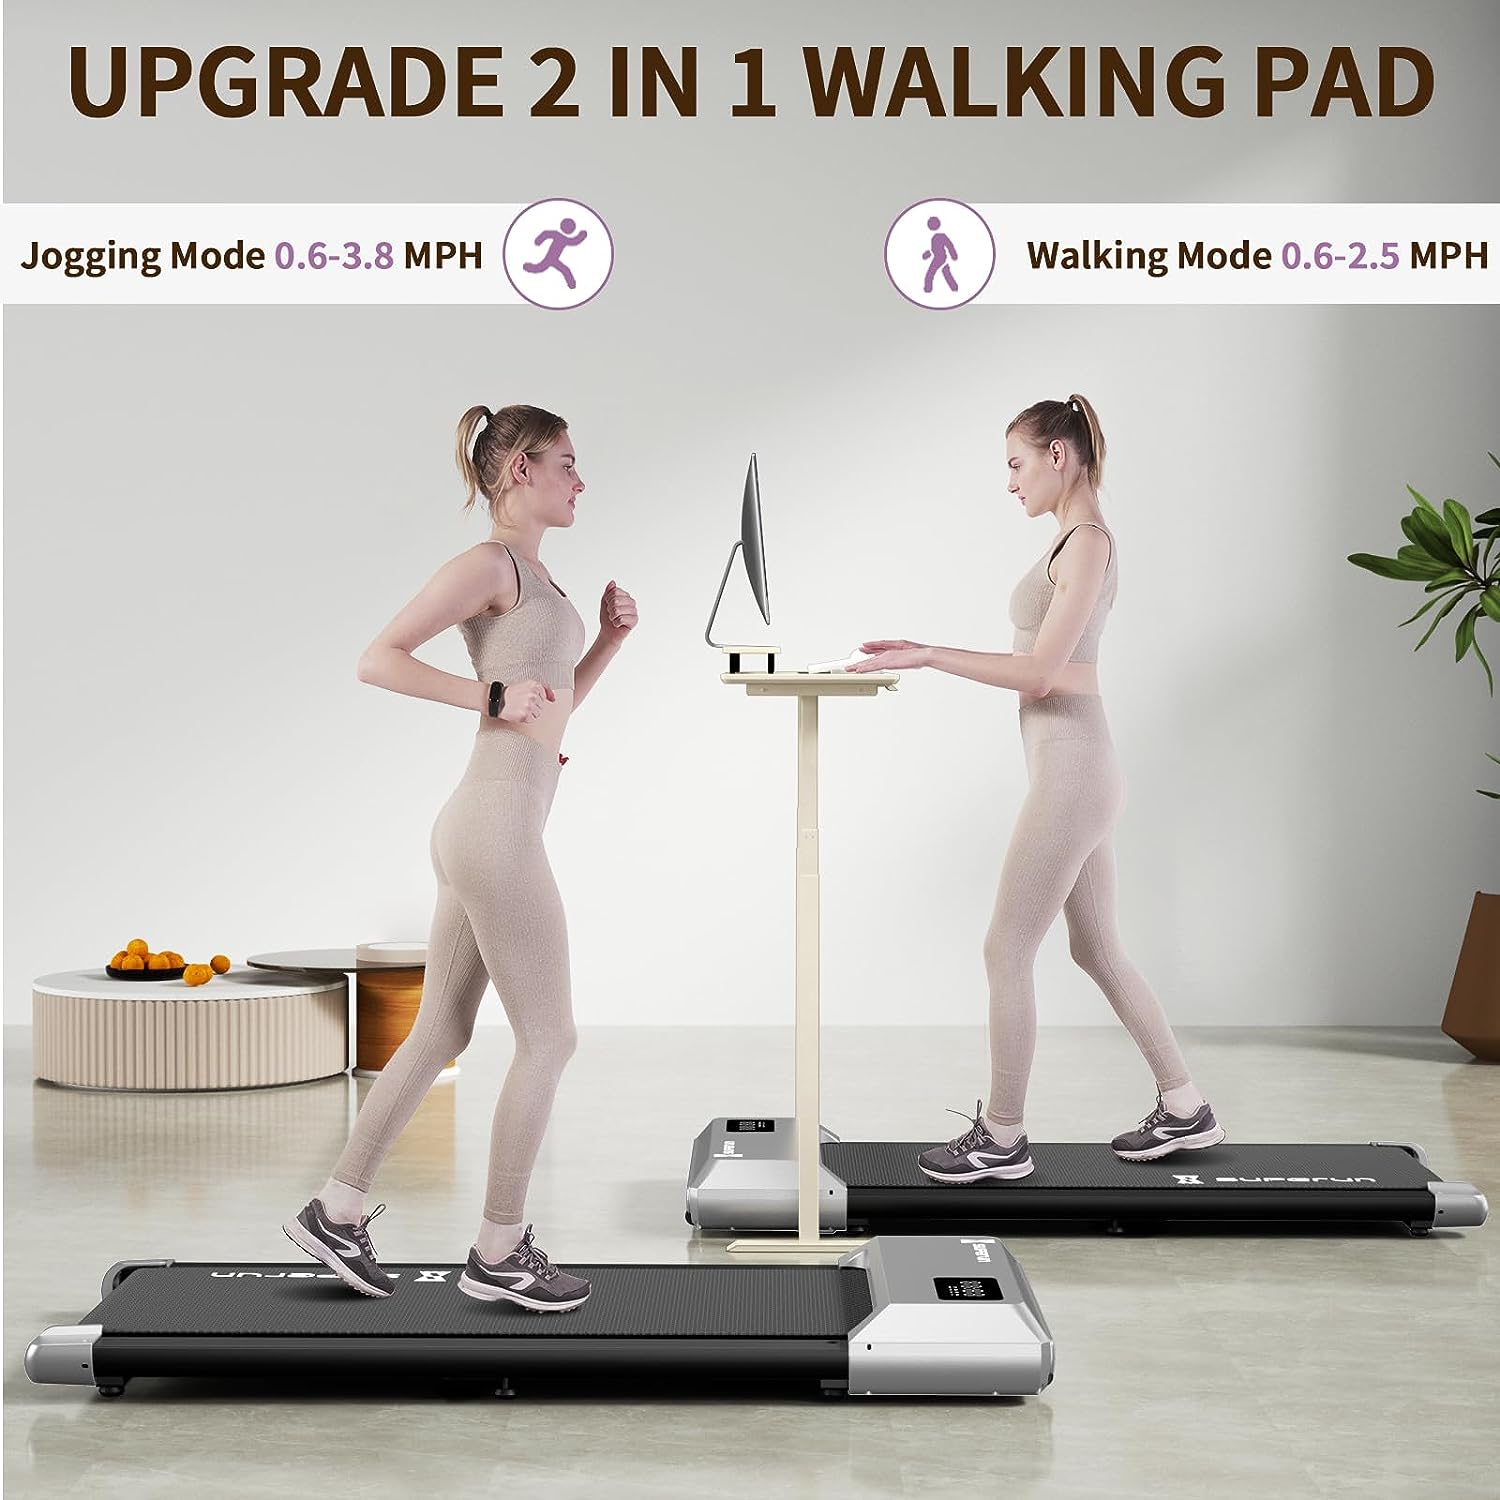 SupeRun 2 in 1 Under Desk Treadmill, Low Noise Compact Walking Pad with Remote Control, 2.5 HP Portable Treadmill Desk Workstation with 300lbs Capacity, LED Display, Sliver